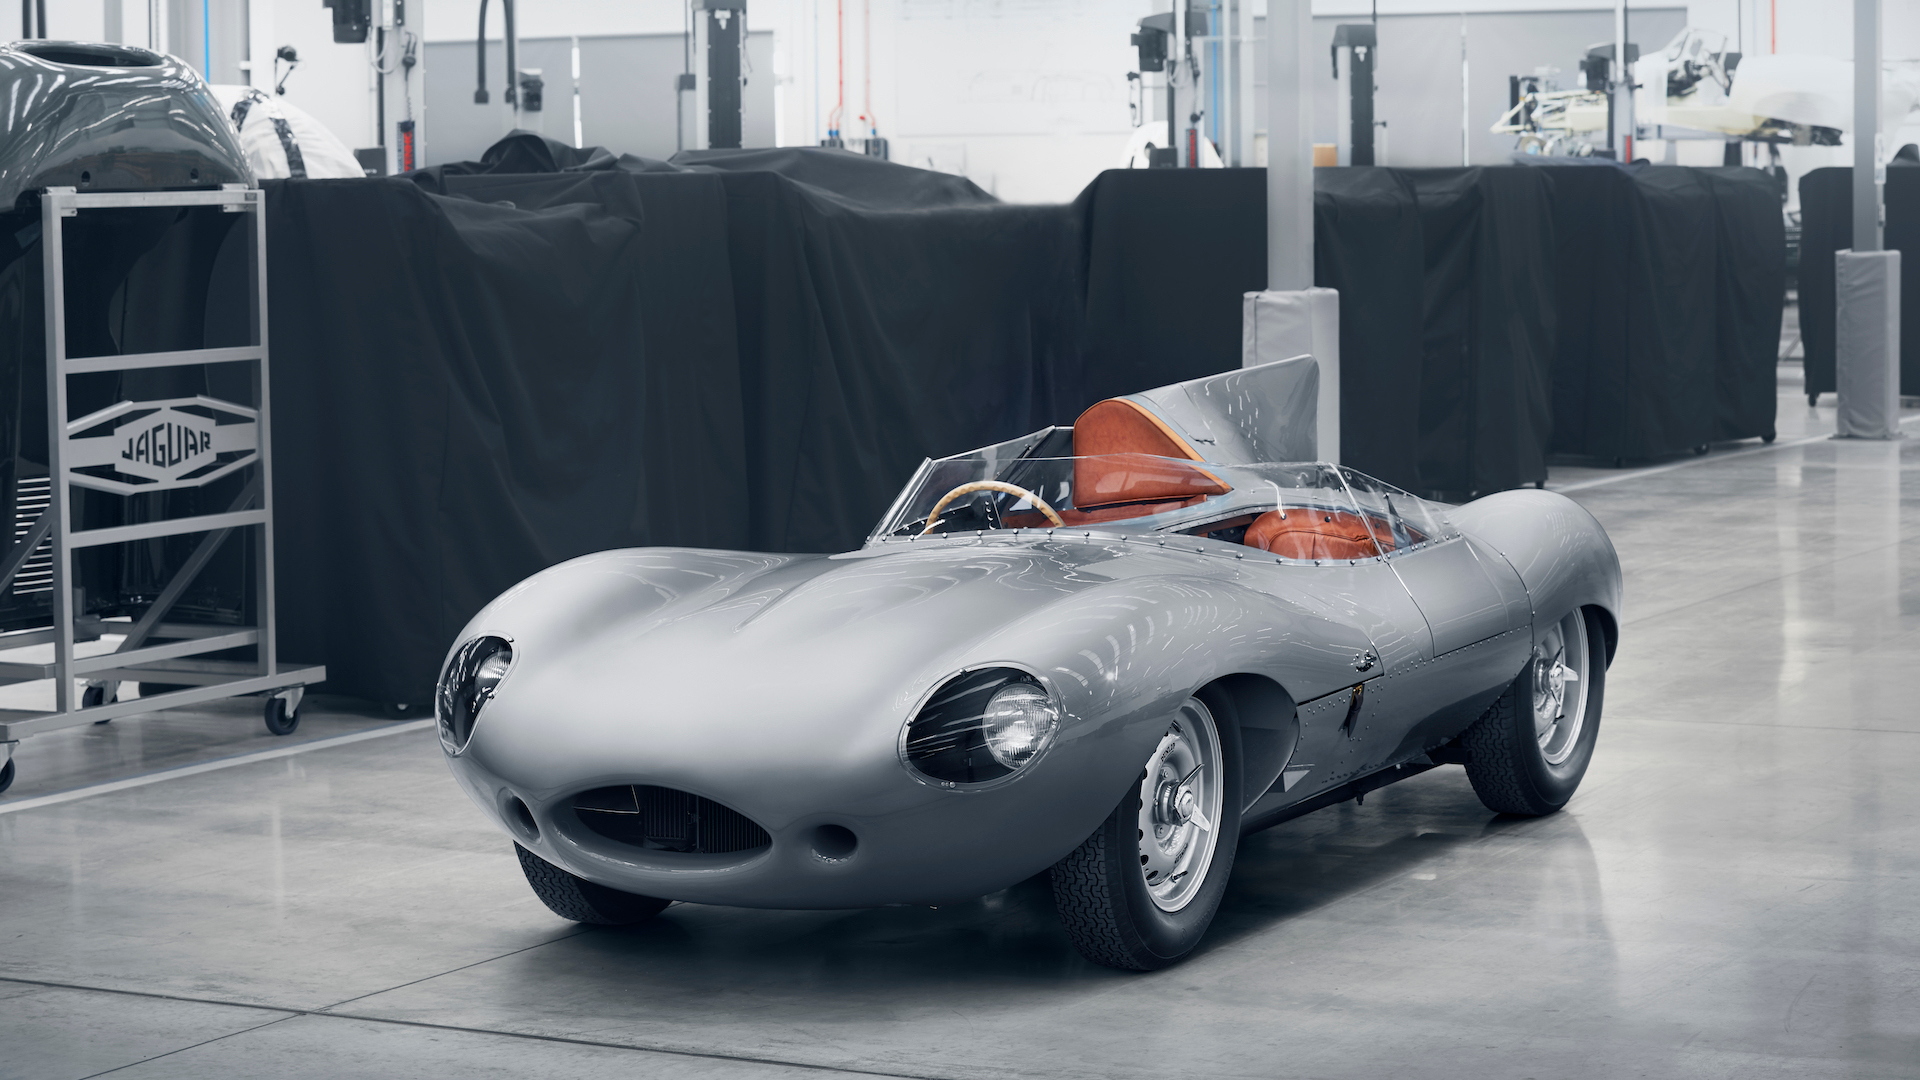 Jaguar restarting production of D-Type after 62 years